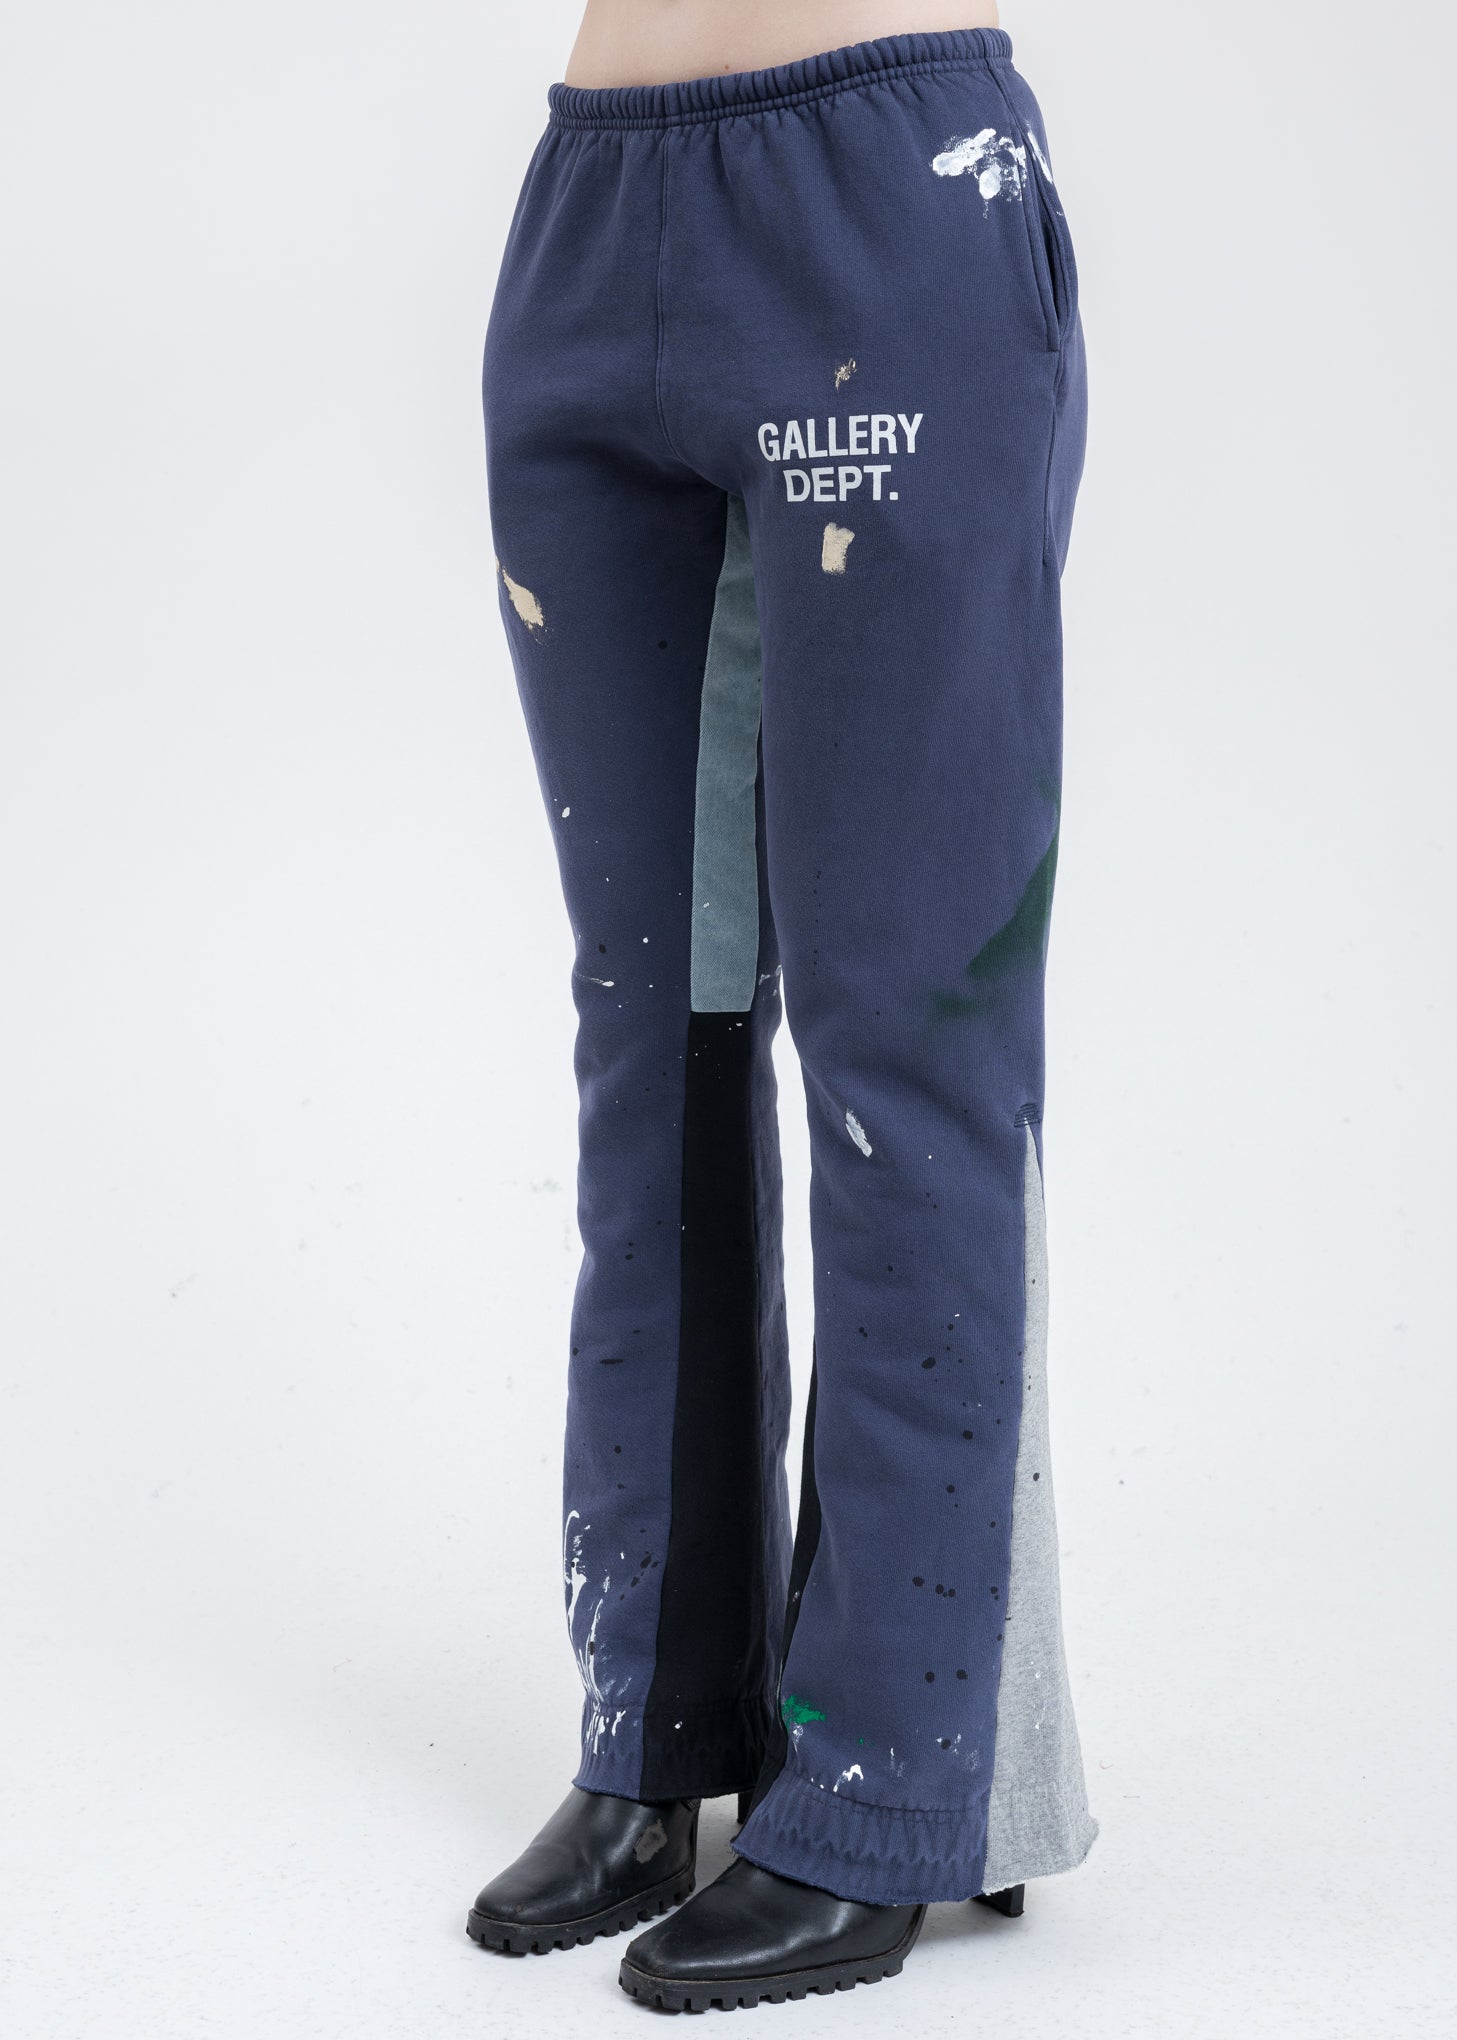 Gallery Dept. Flared painted Sweatpants grey